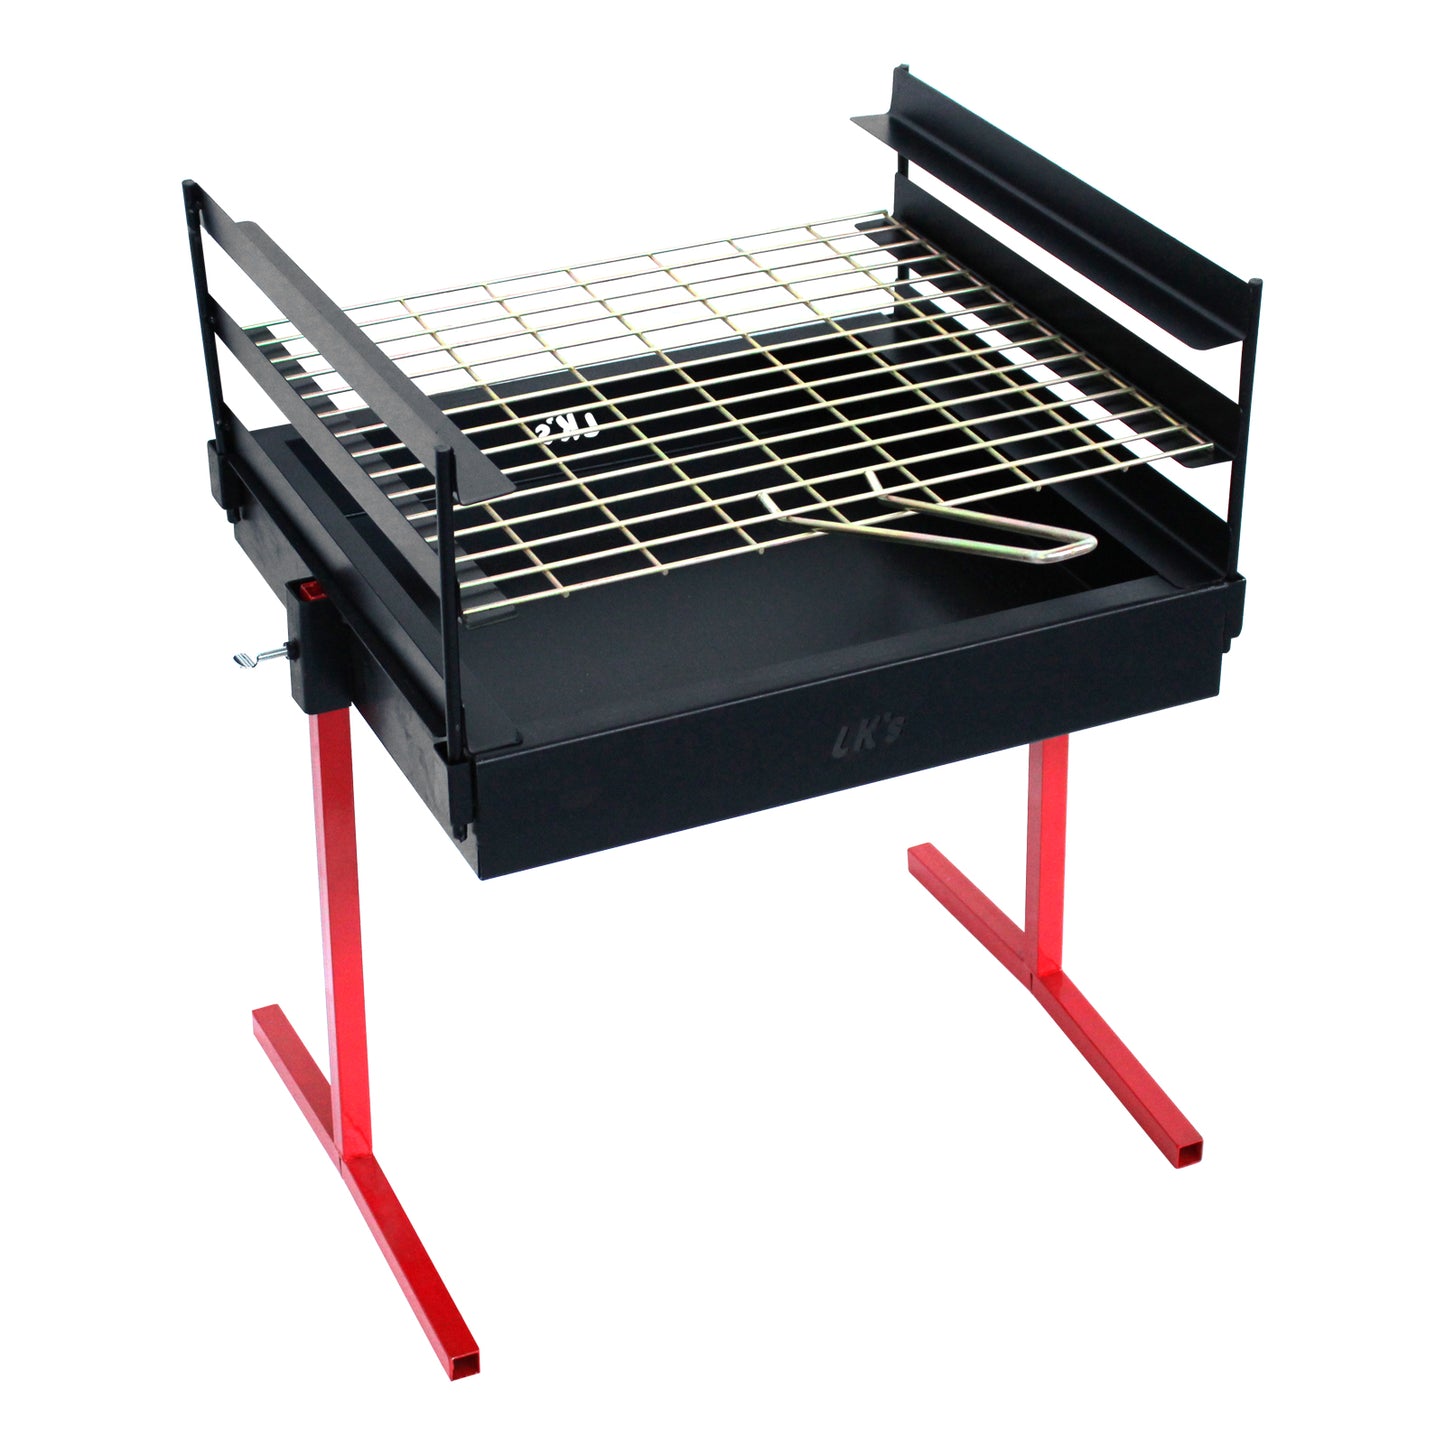 Sit Braai Barbecue with Adjustable Grid Stand